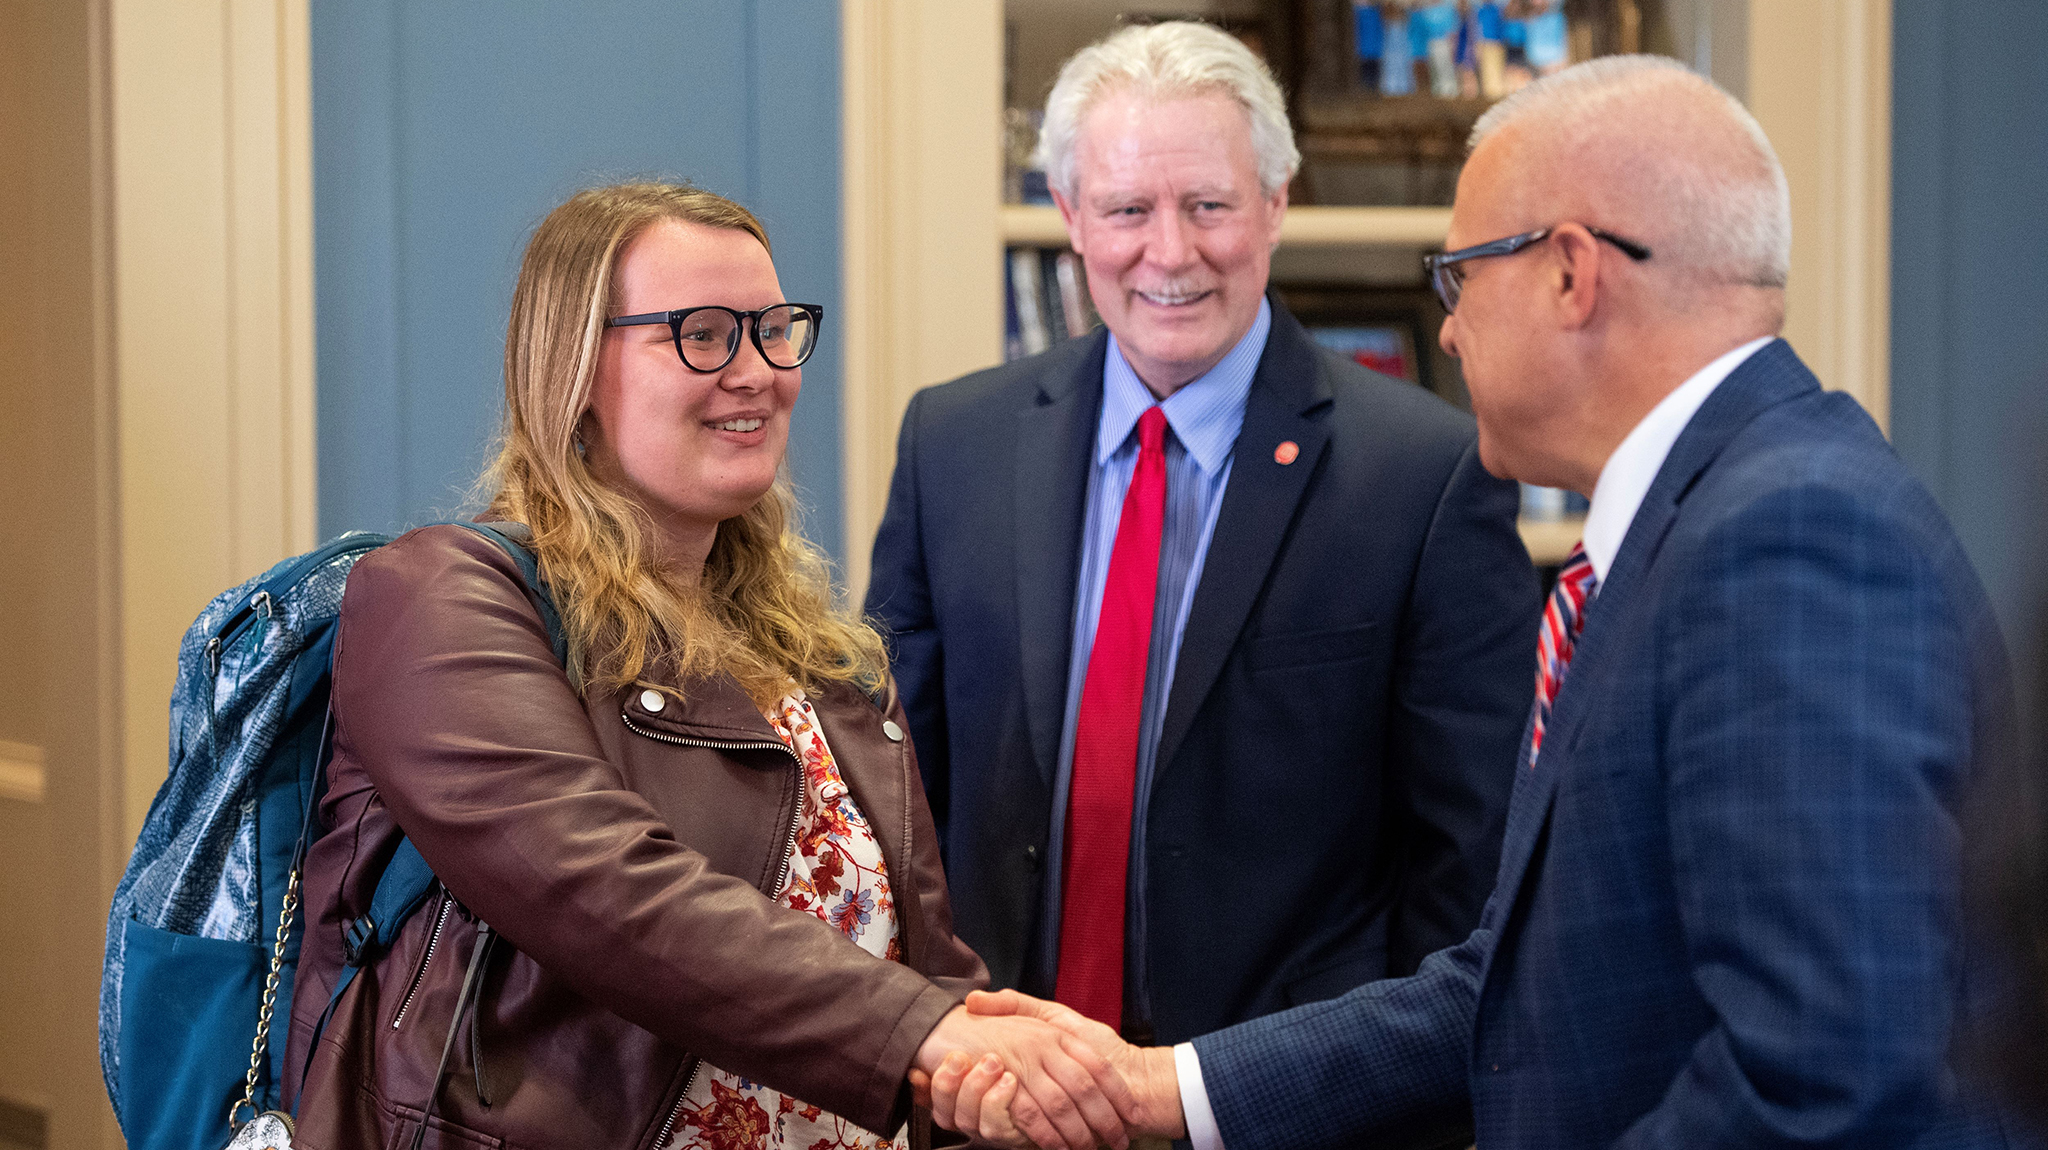 Provost Noel Wilkin (right) and Chancellor Glenn Boyce (center) congratulate Madeleine Dotson for becoming a 2023 Truman Scholar on Monday (April 10) in the chancellor’s office in the Lyceum. Dotson is the university’s 18th winner of the prestigious national scholarship for aspiring leaders. Photo by Thomas Graning/Ole Miss Digital Imaging Services